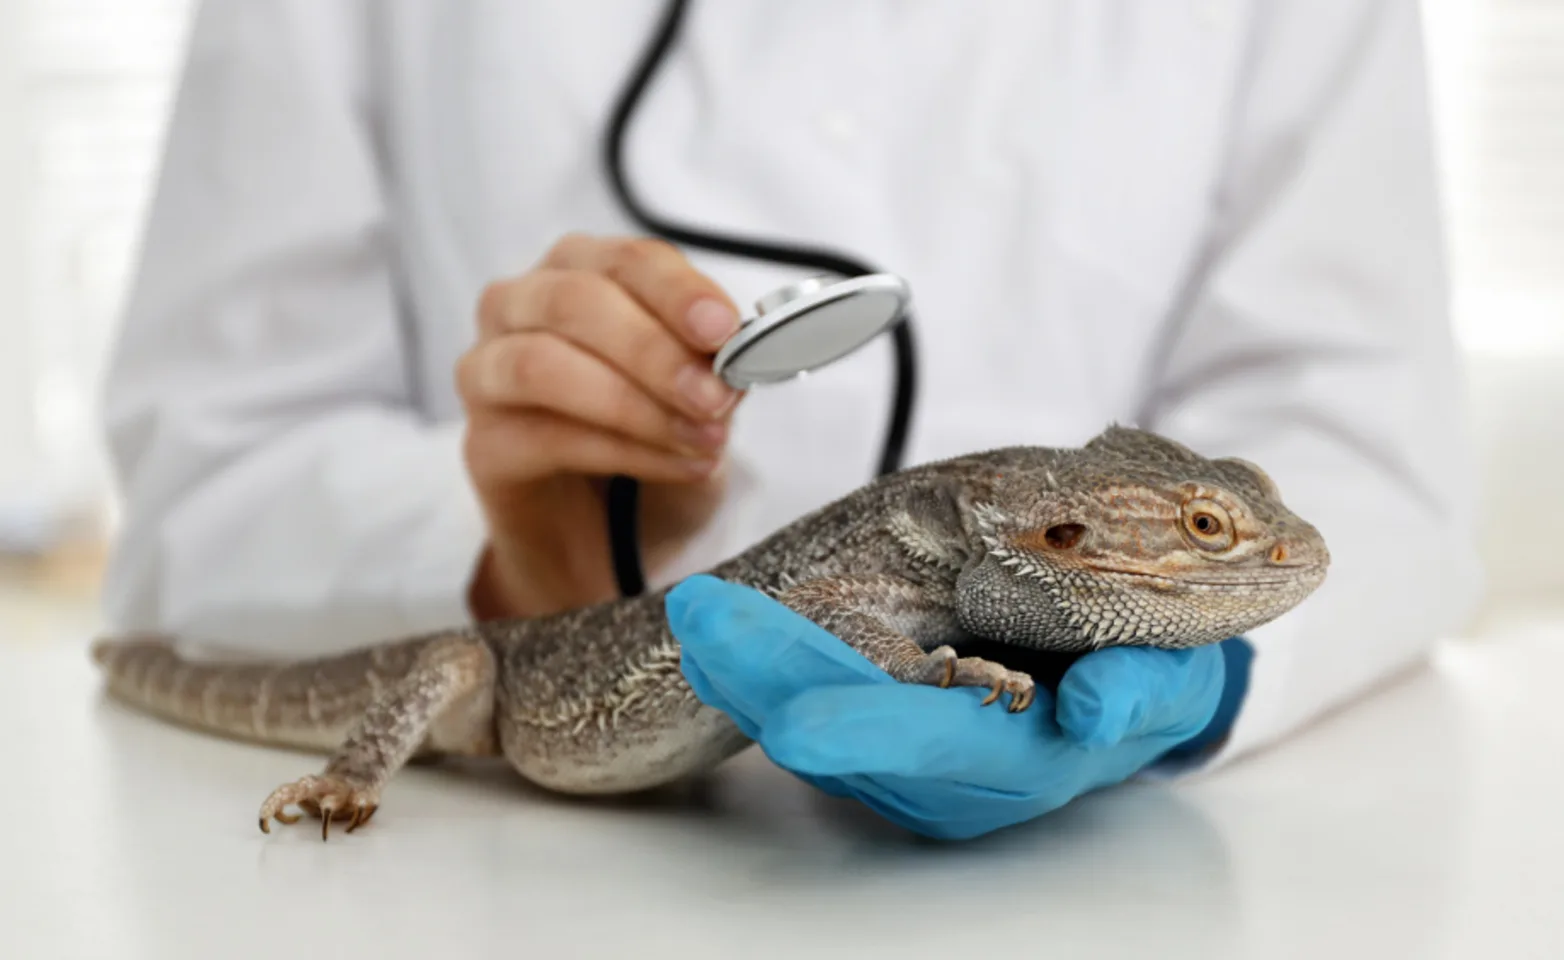 A veterinarian examining a lizard with a stethoscope